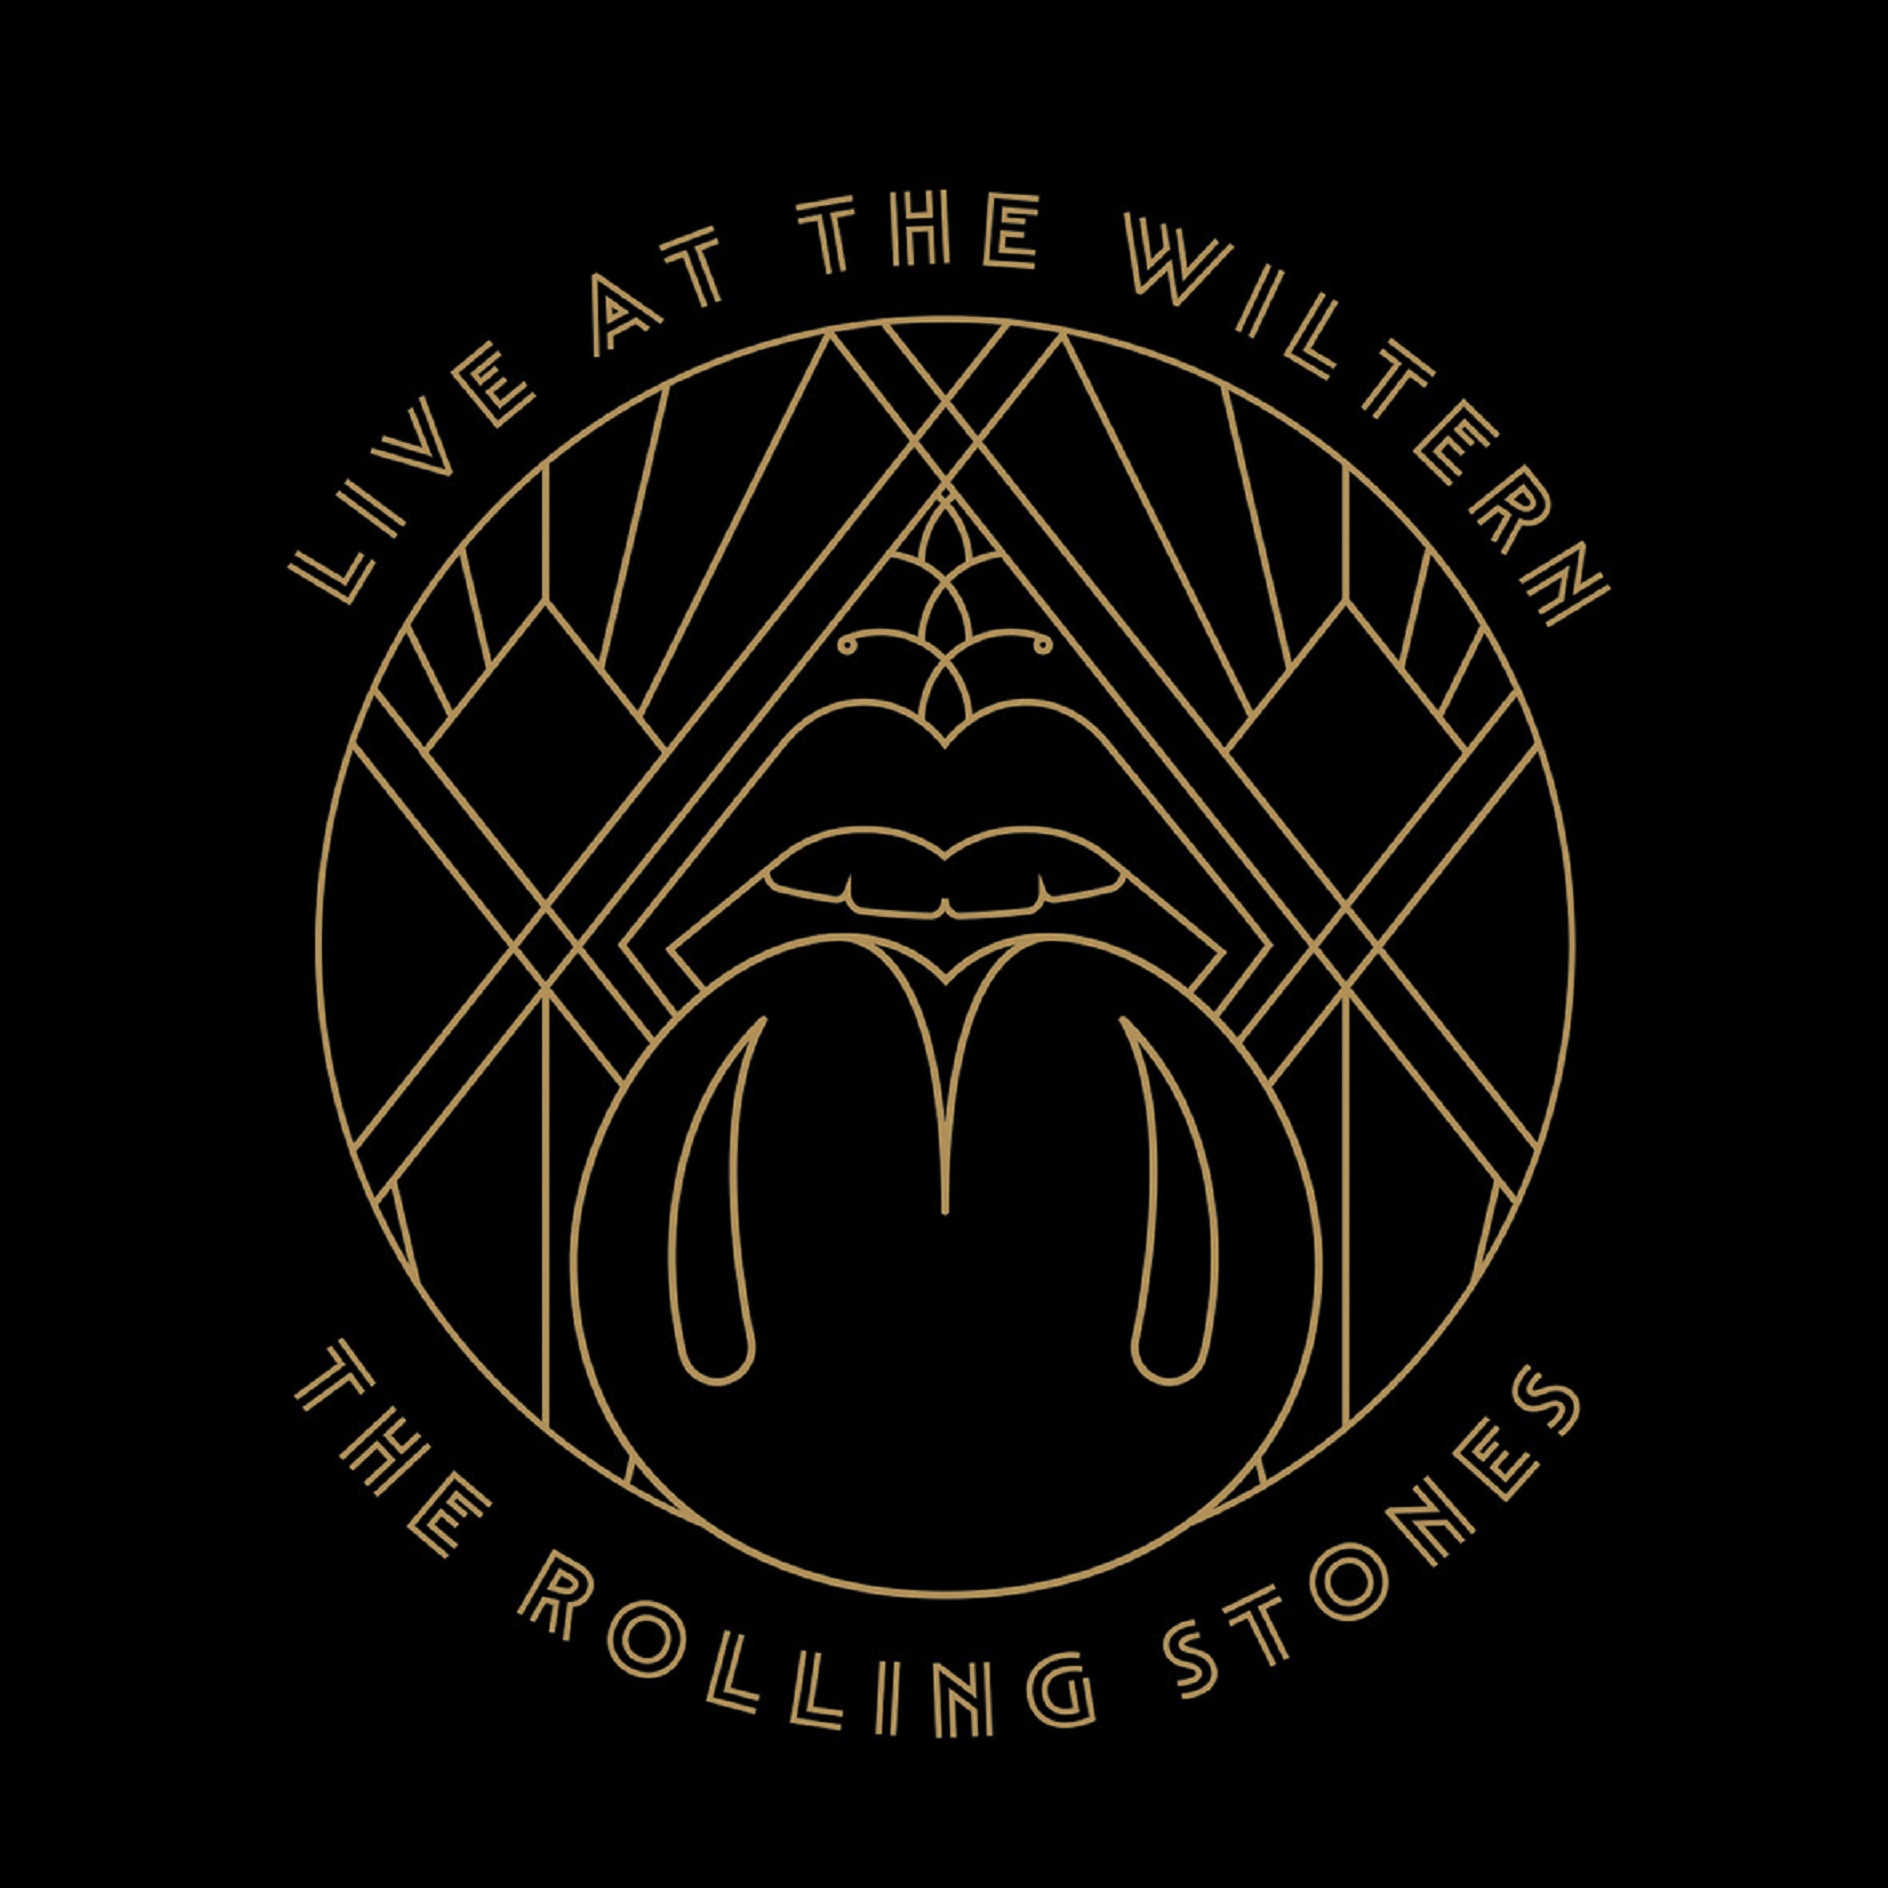 THE ROLLING STONES LIVE AT THE WILTERN Out On Multiple Formats March 8, 2024